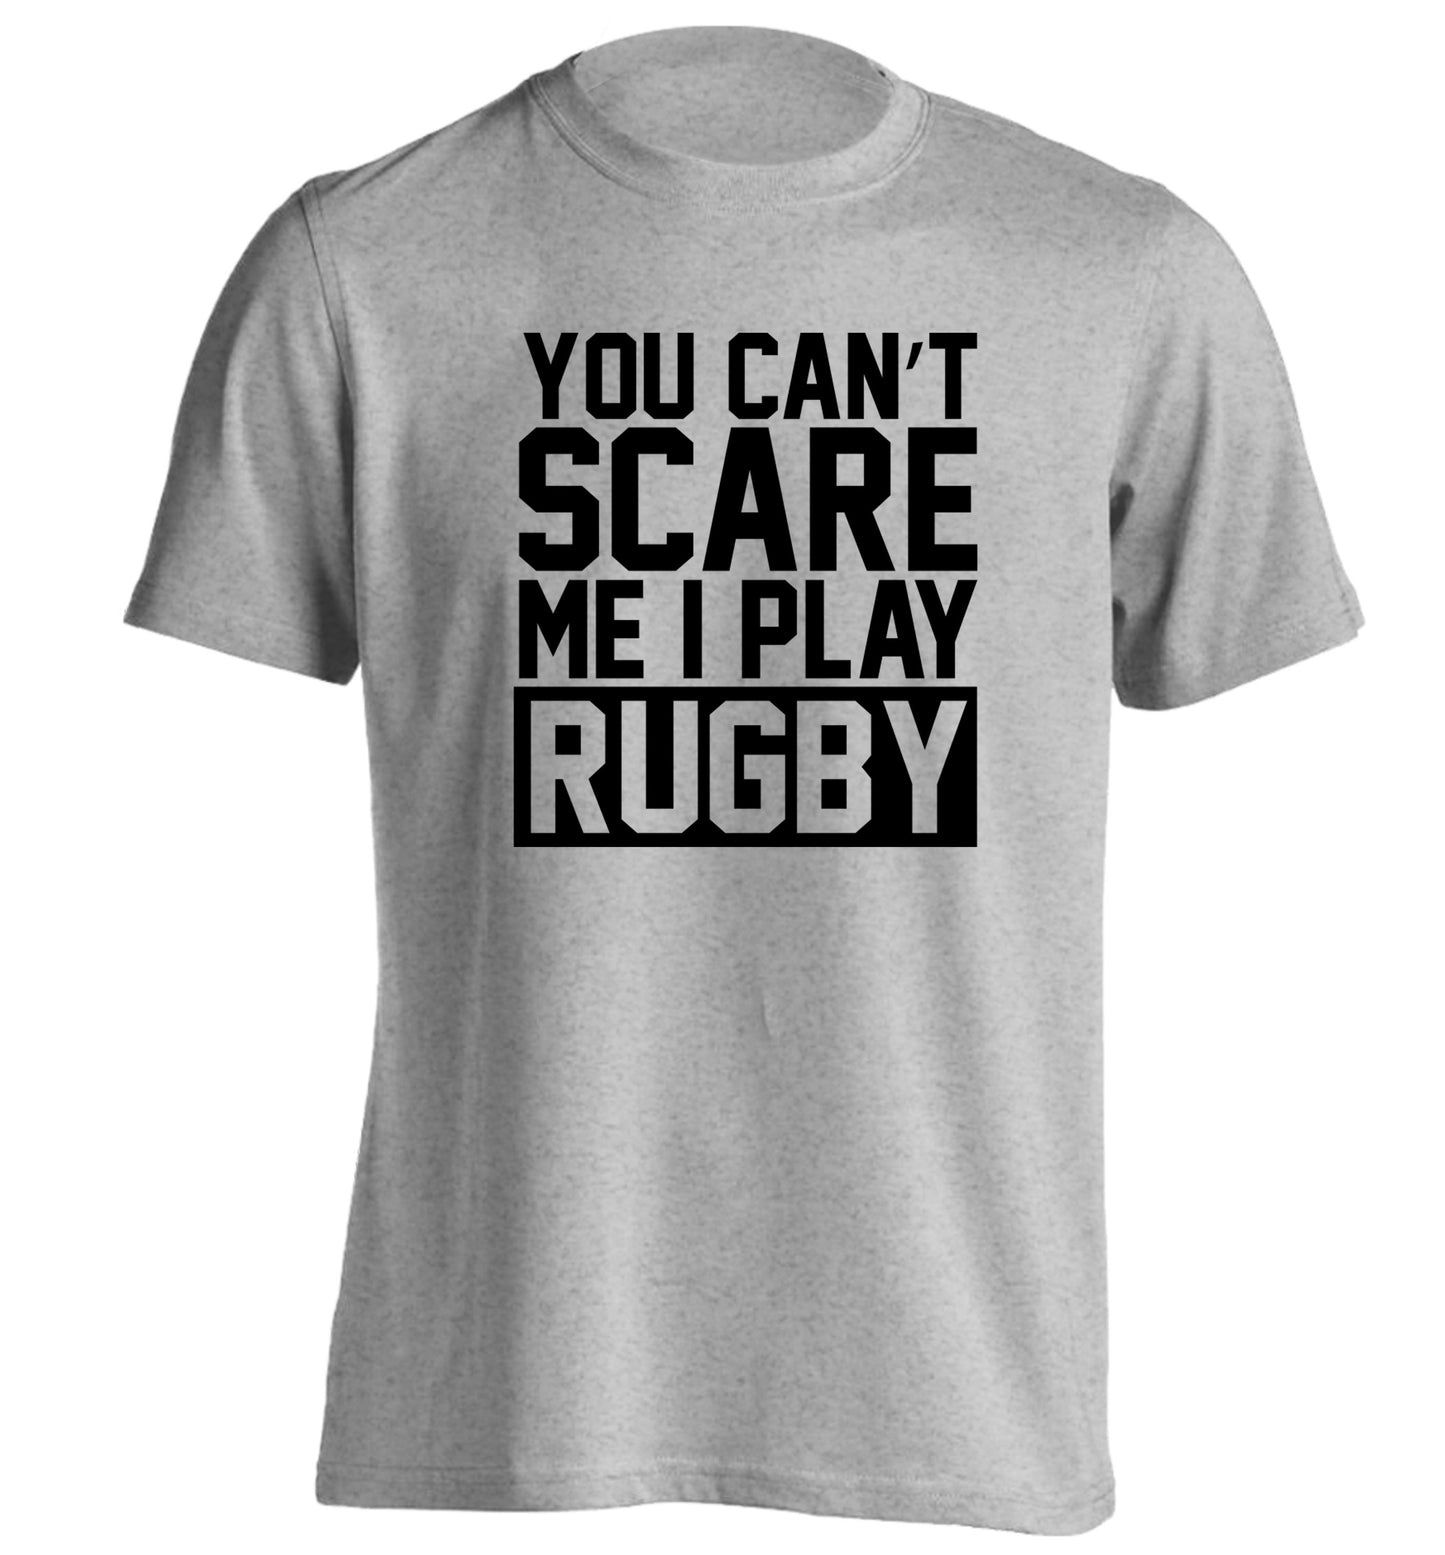 You can't scare me I play rugby adults unisex grey Tshirt 2XL